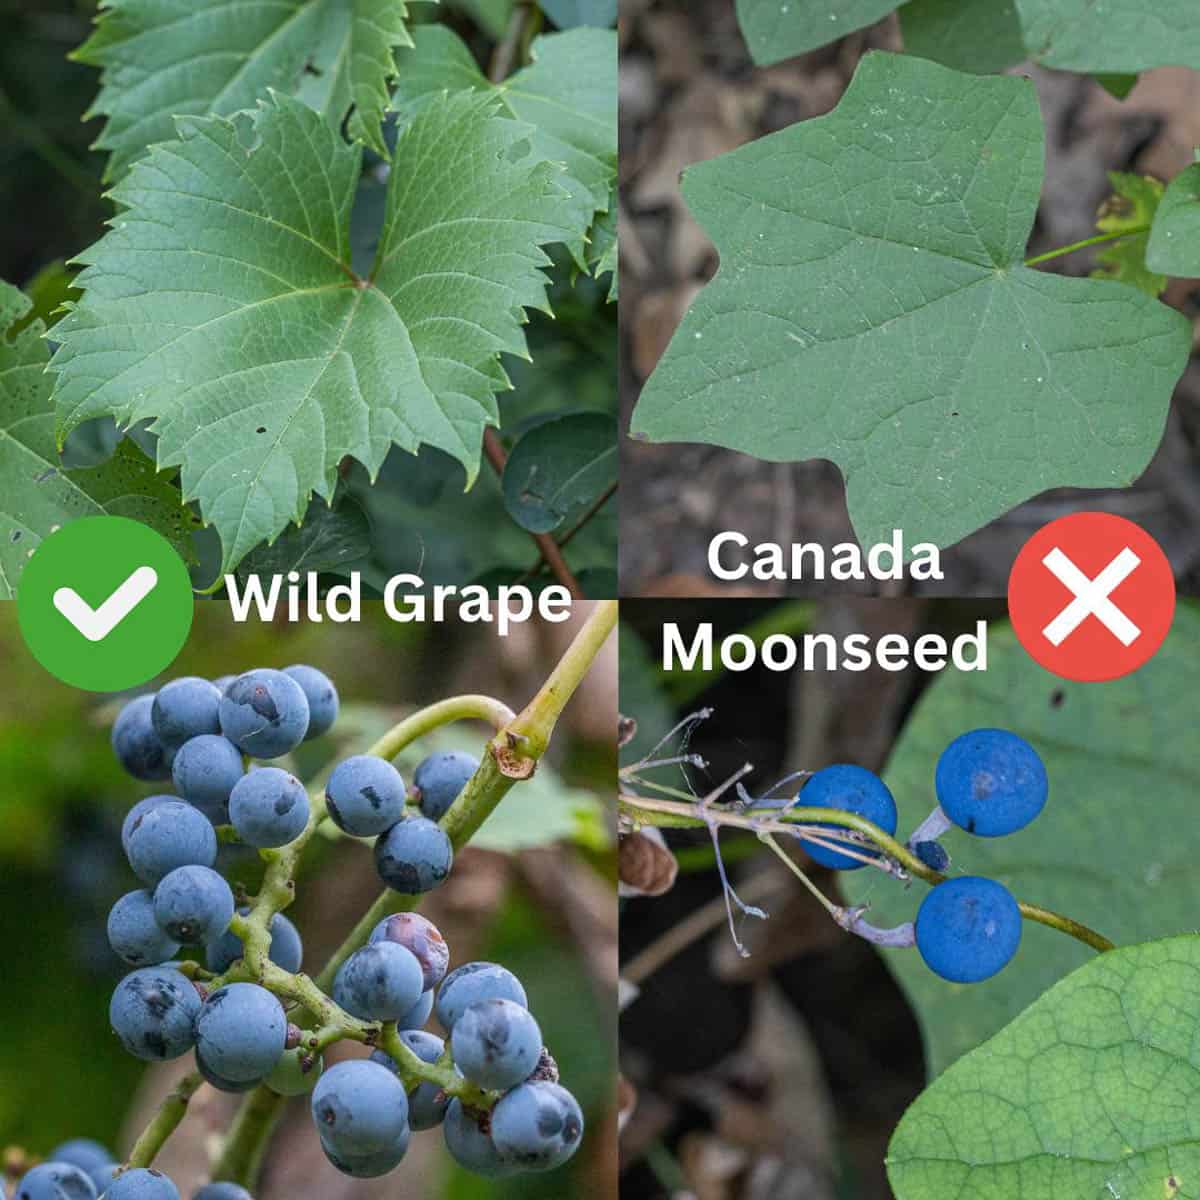 An info graphic comparing the leaves and fruit of canada moonseed and wild grape for identification purposes. 